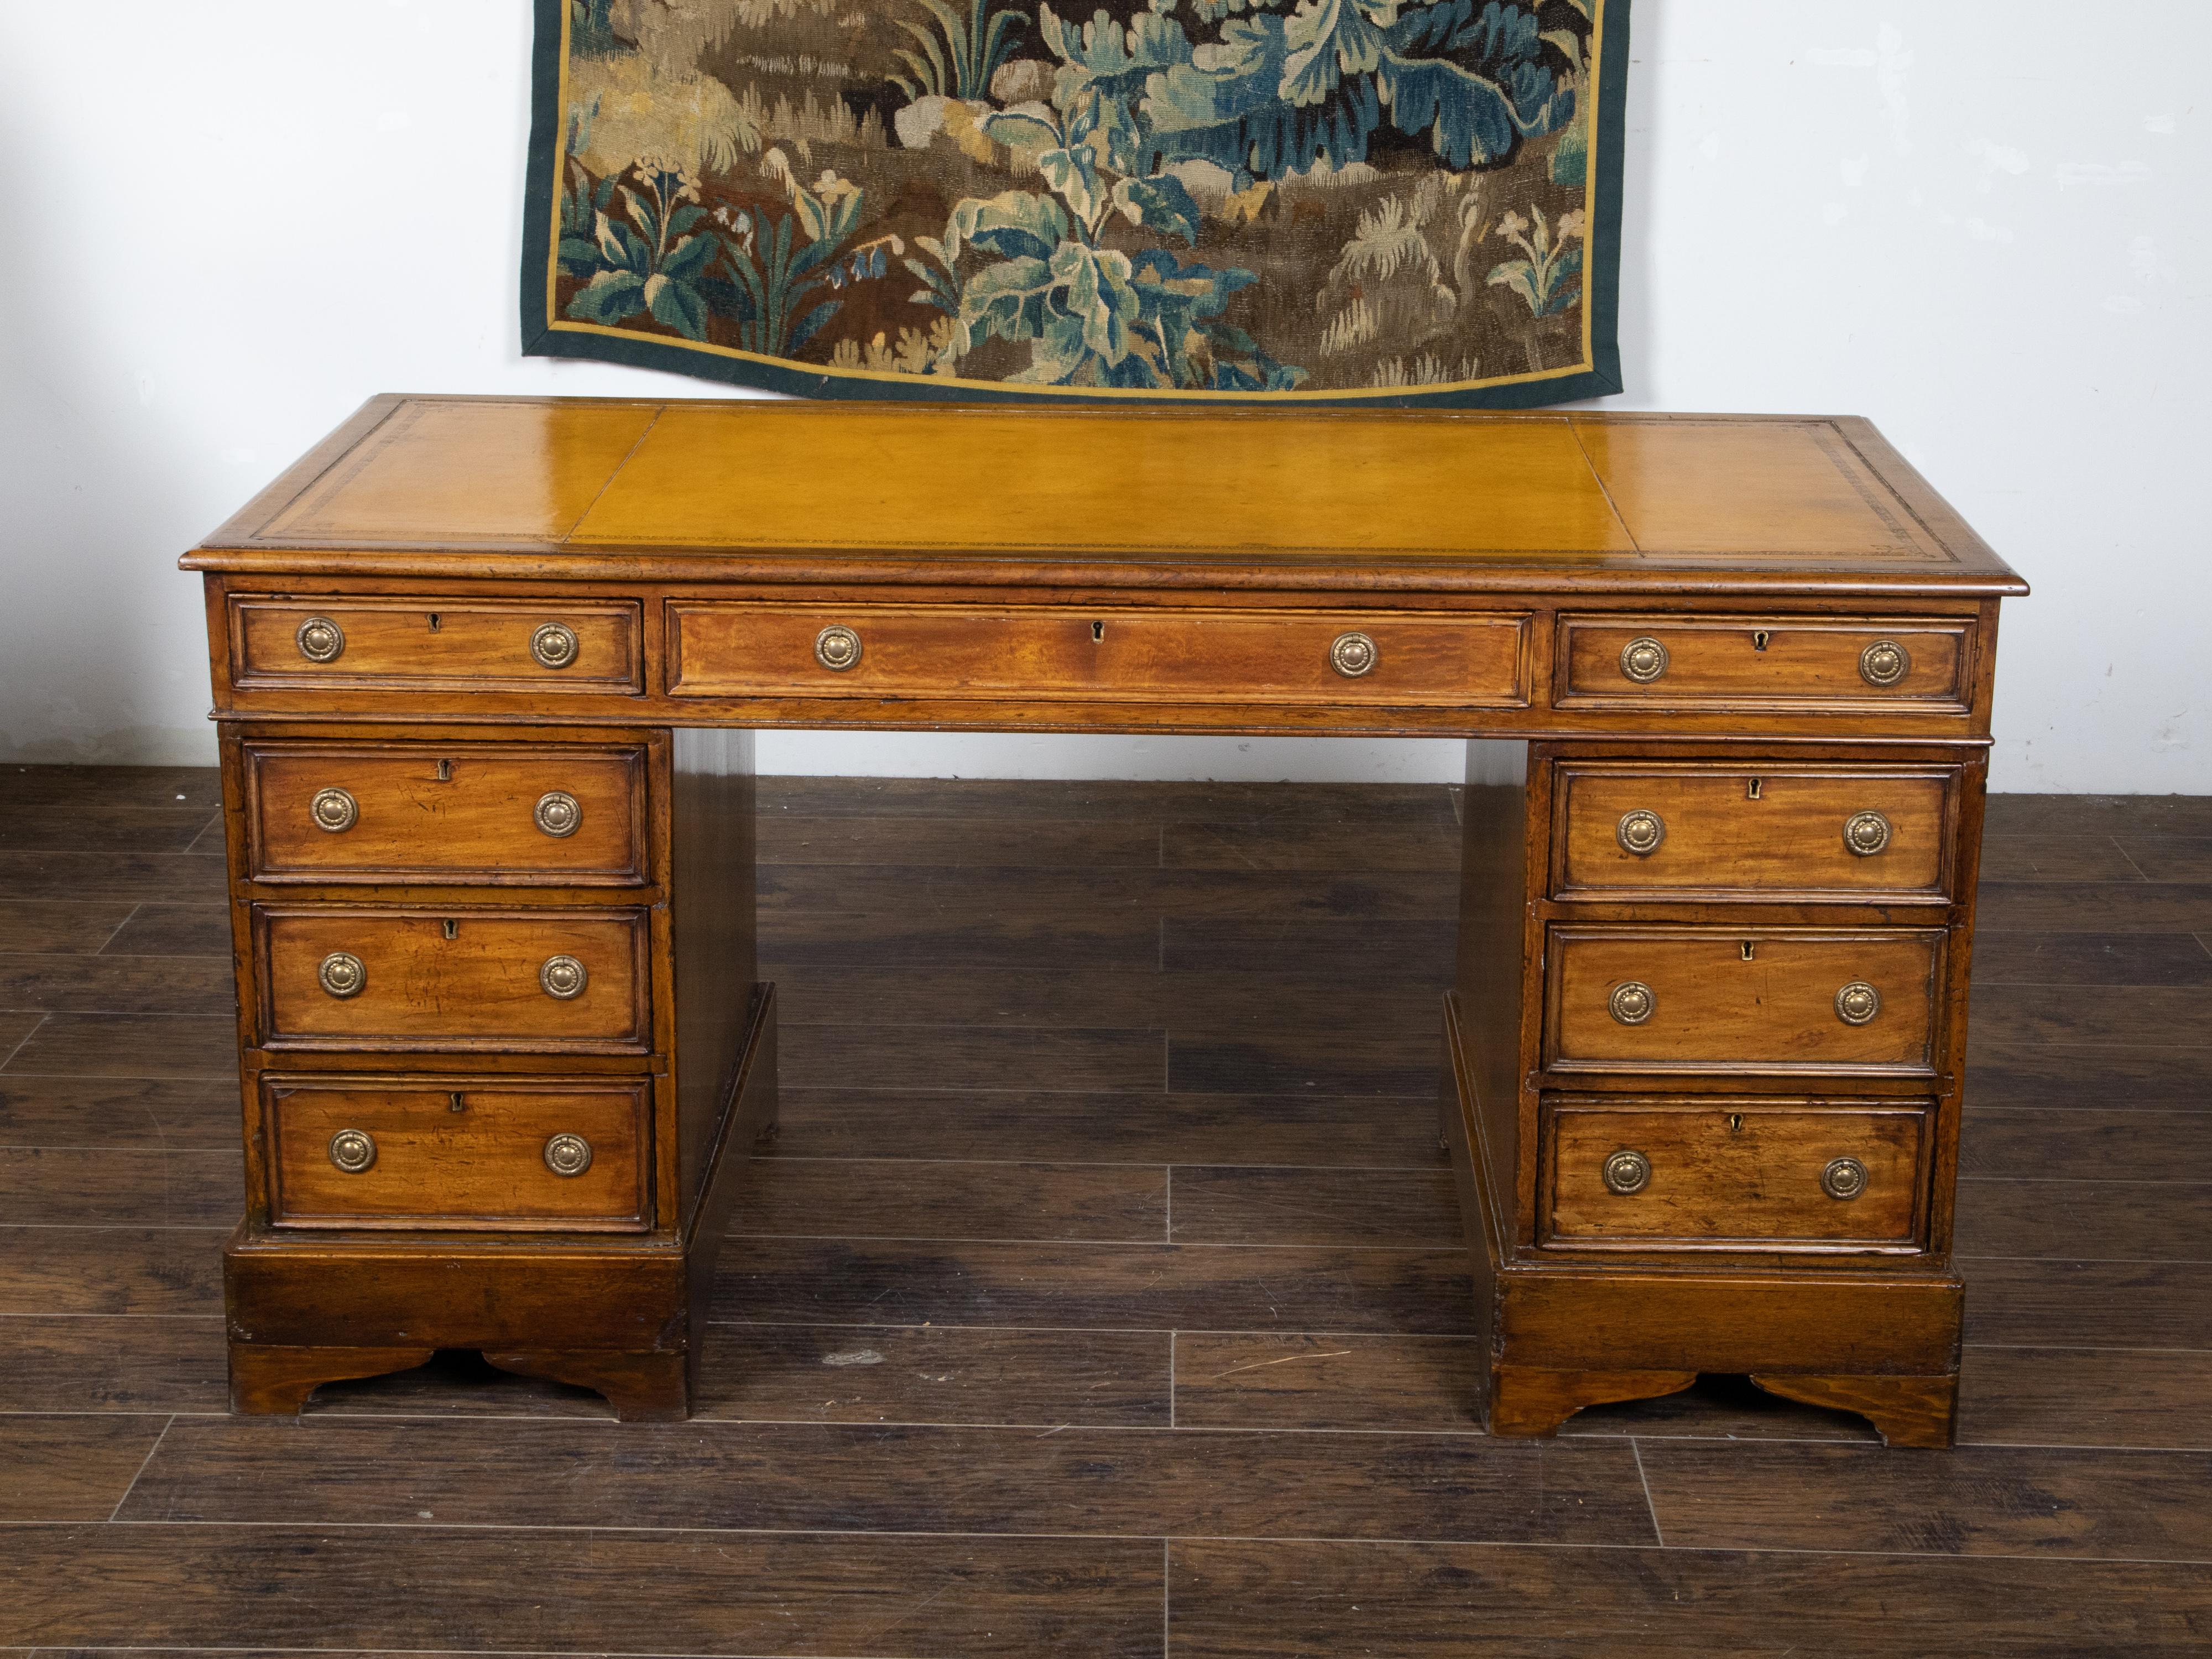 An English elm wood kneehole desk from the 19th century, with caramel leather top, tooled friezes, nine drawers and brass hardware. Created in England during the 19th century, this kneehole desk features a rectangular caramel colored partitioned